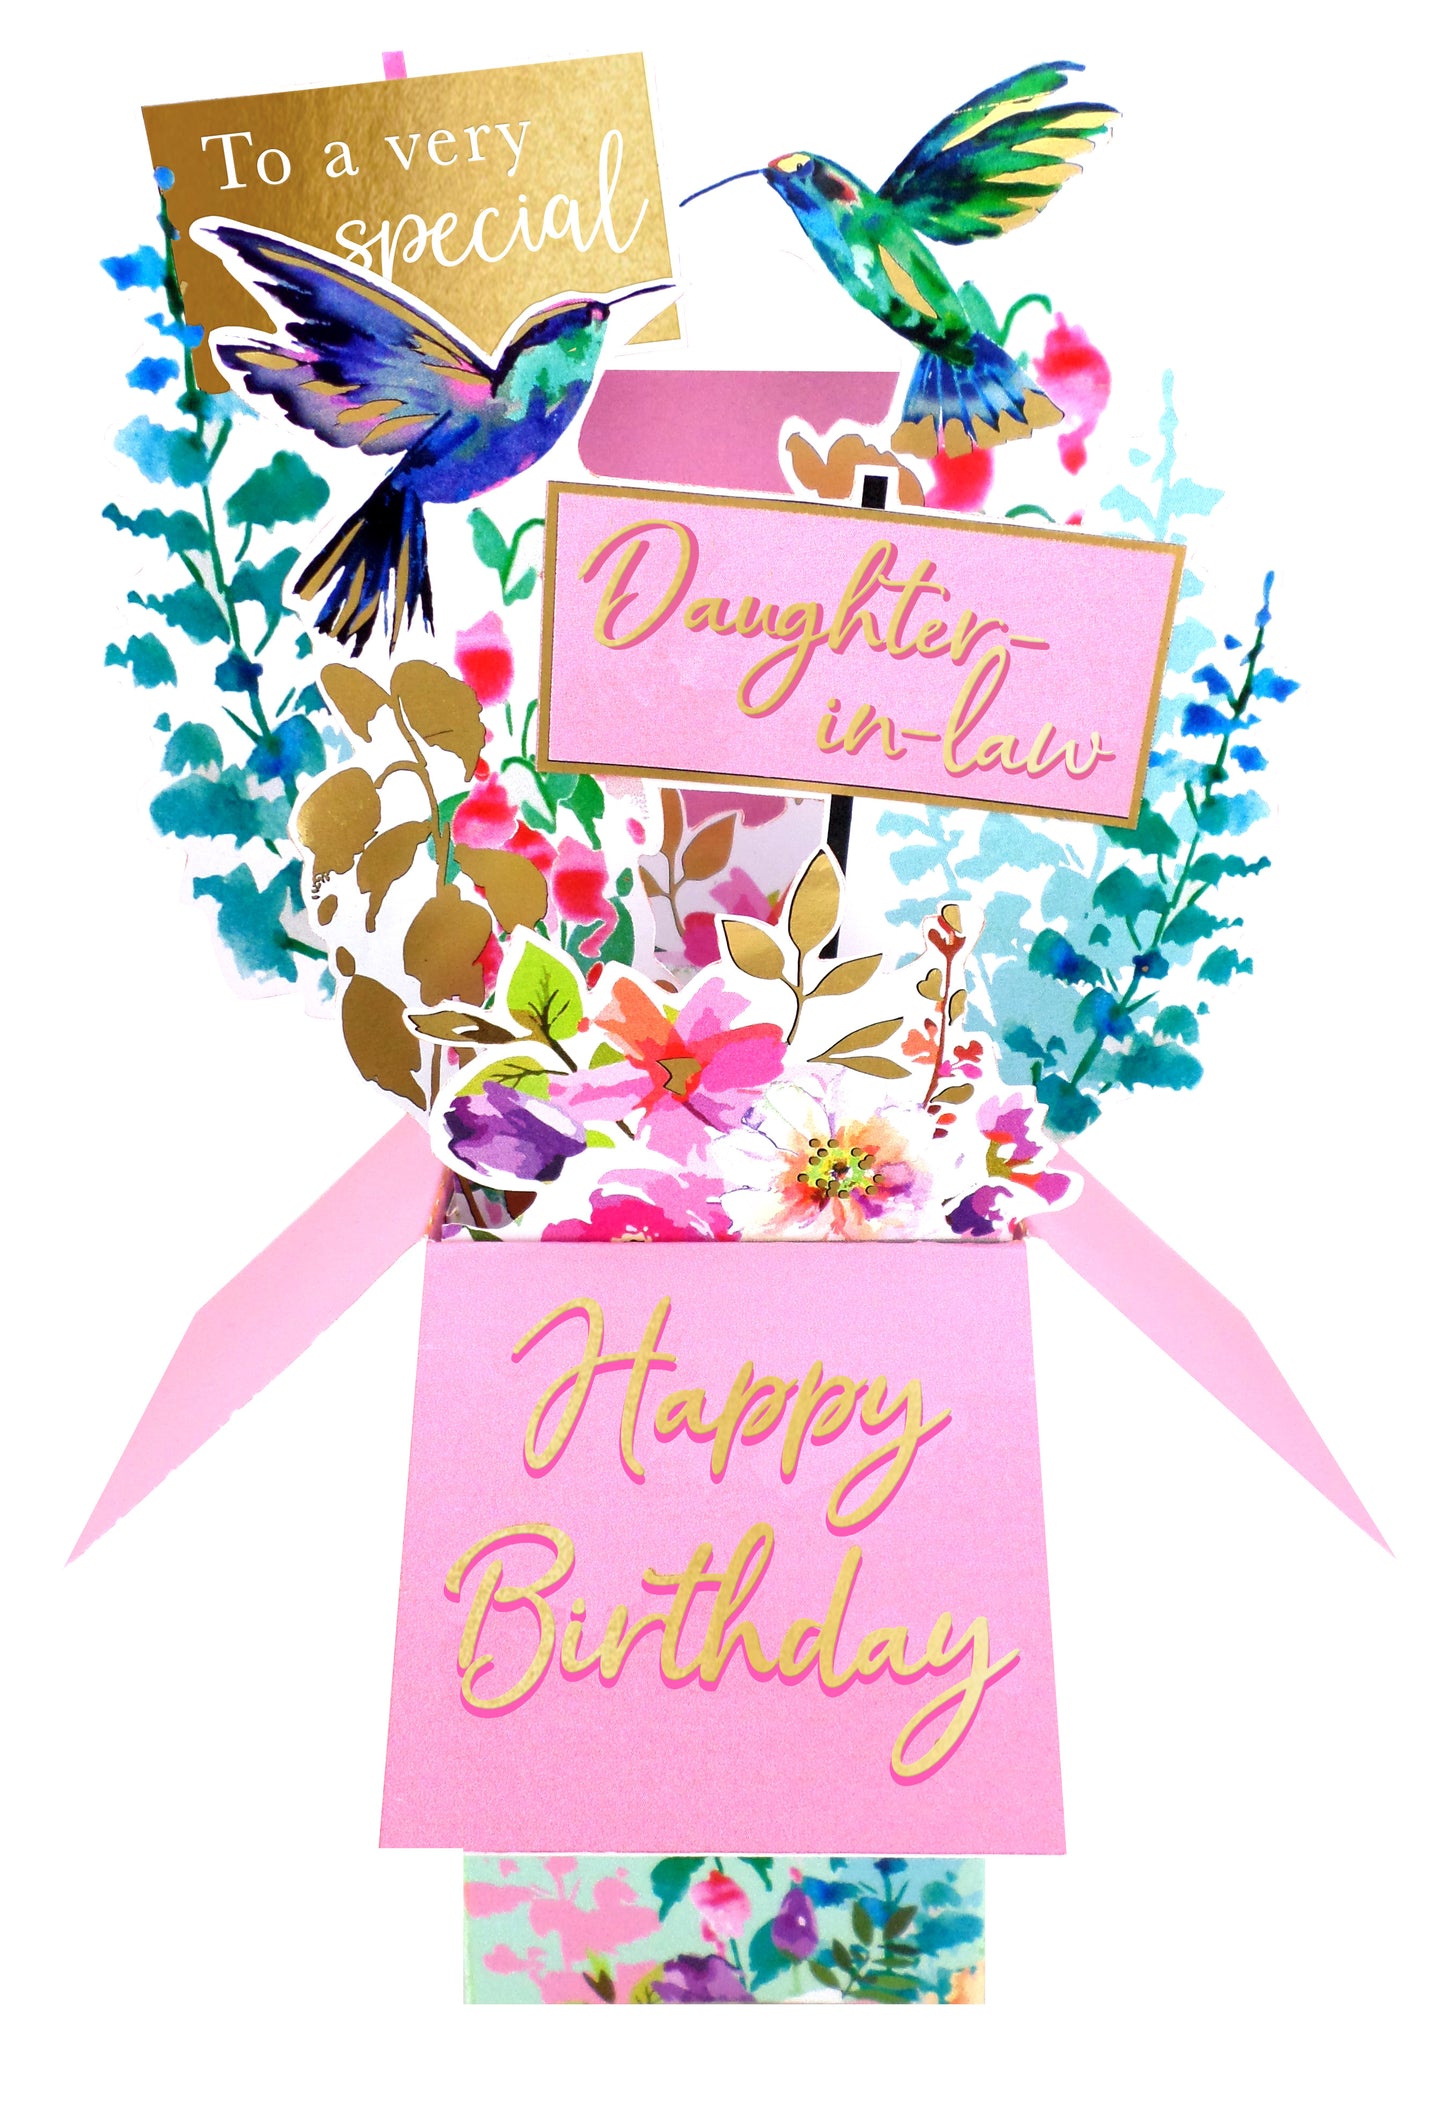 Clever Cube Special Daughter-In-Law Birthday Blooms Galore Pop Up Greeting Card